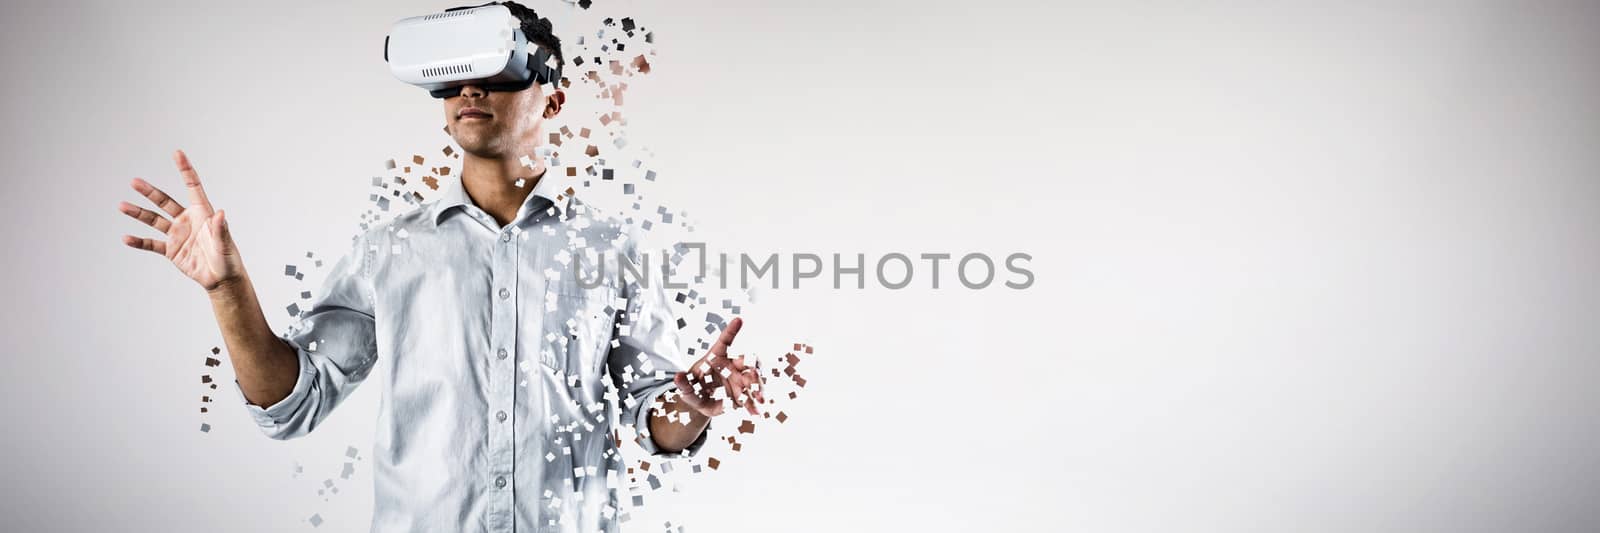 Composite image of man using virtual reality headset by Wavebreakmedia